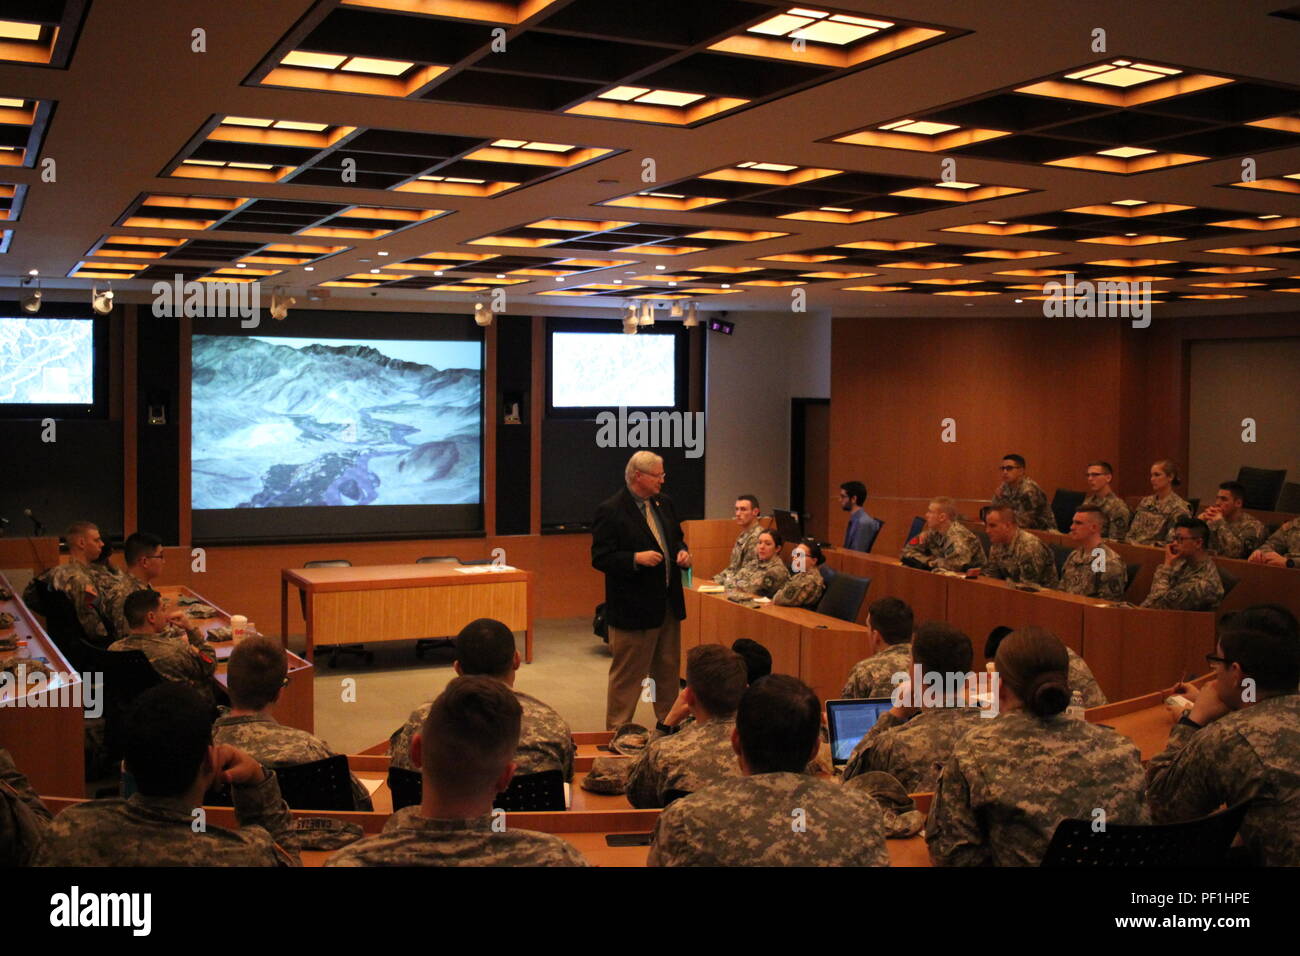 Dr. Daniel Jordan leads cadets from Princeton, Rutgers, and Seton Hall universities through a virtual staff ride of the battle of Wanat in Afghanistan. The cadets were able to 'fly' through the terrain using computer-generated imagery. Stock Photo